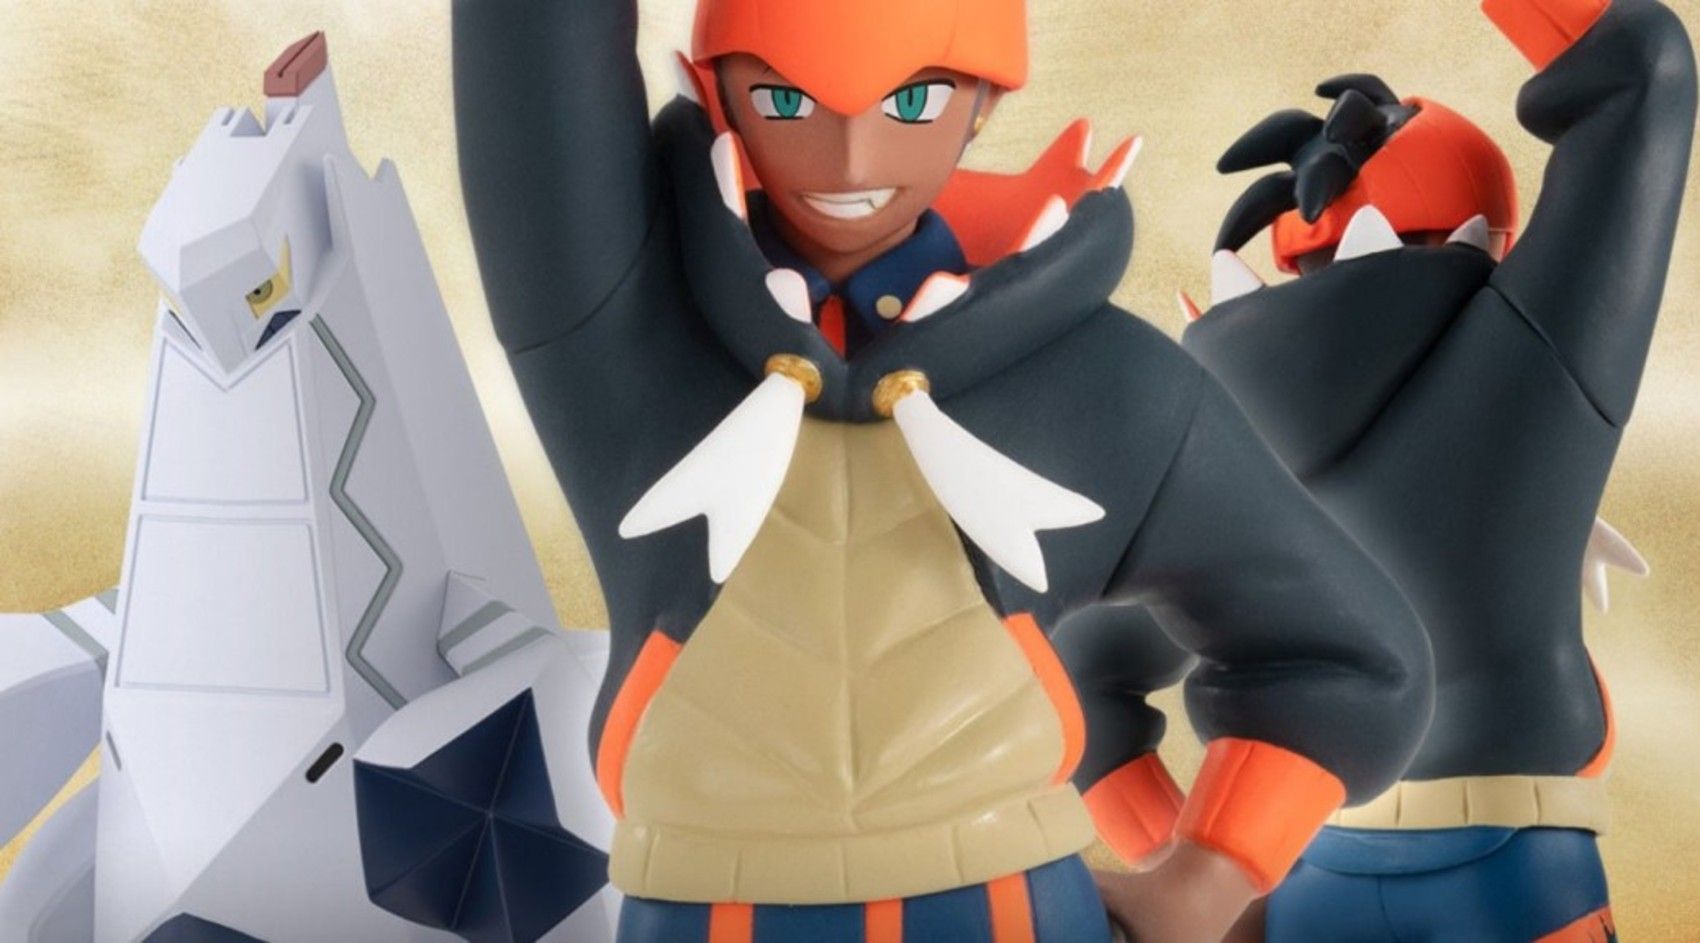 New Pokémon Scale World Galar Figures Are Available Now For PreOrder